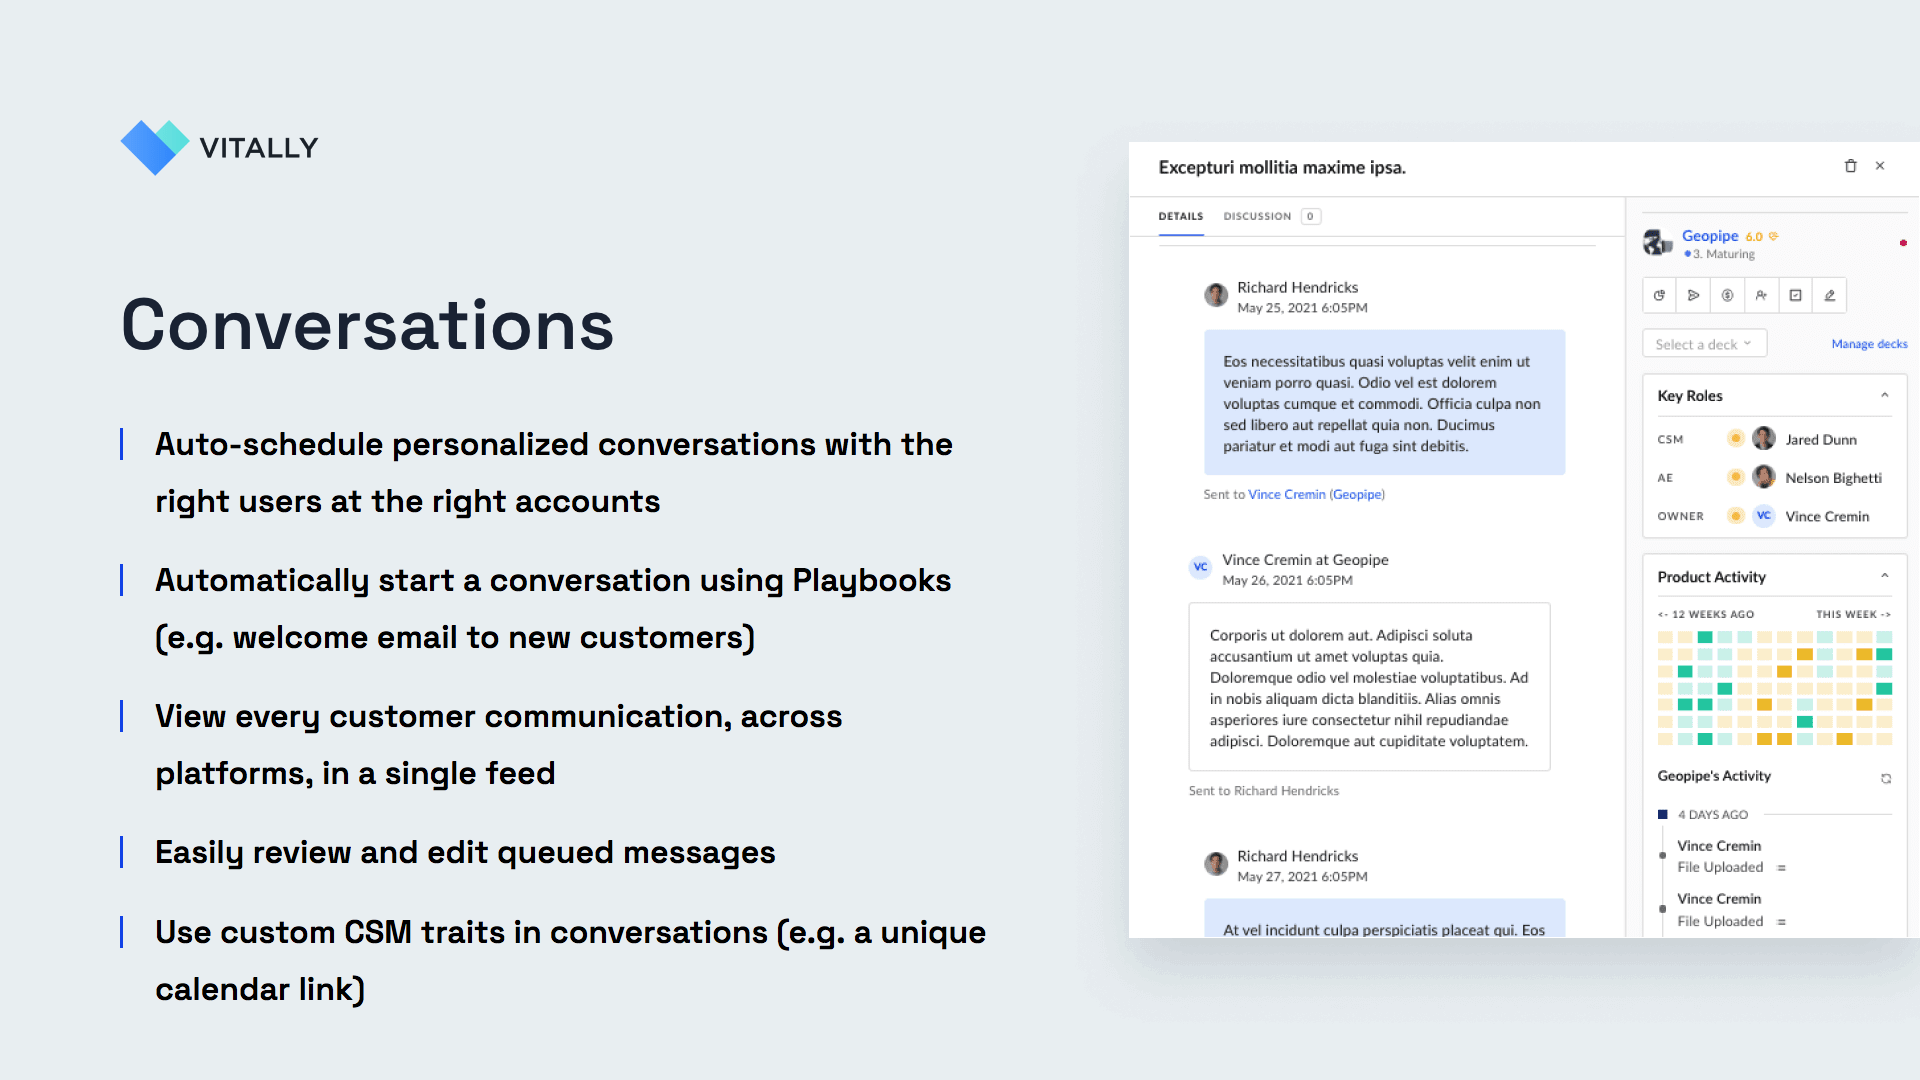 Conversations -- Auto-schedule personalized conversations with the right users at the right accounts. View every customer communication, across platforms, in a single feed. Easily review and edit queued messages.